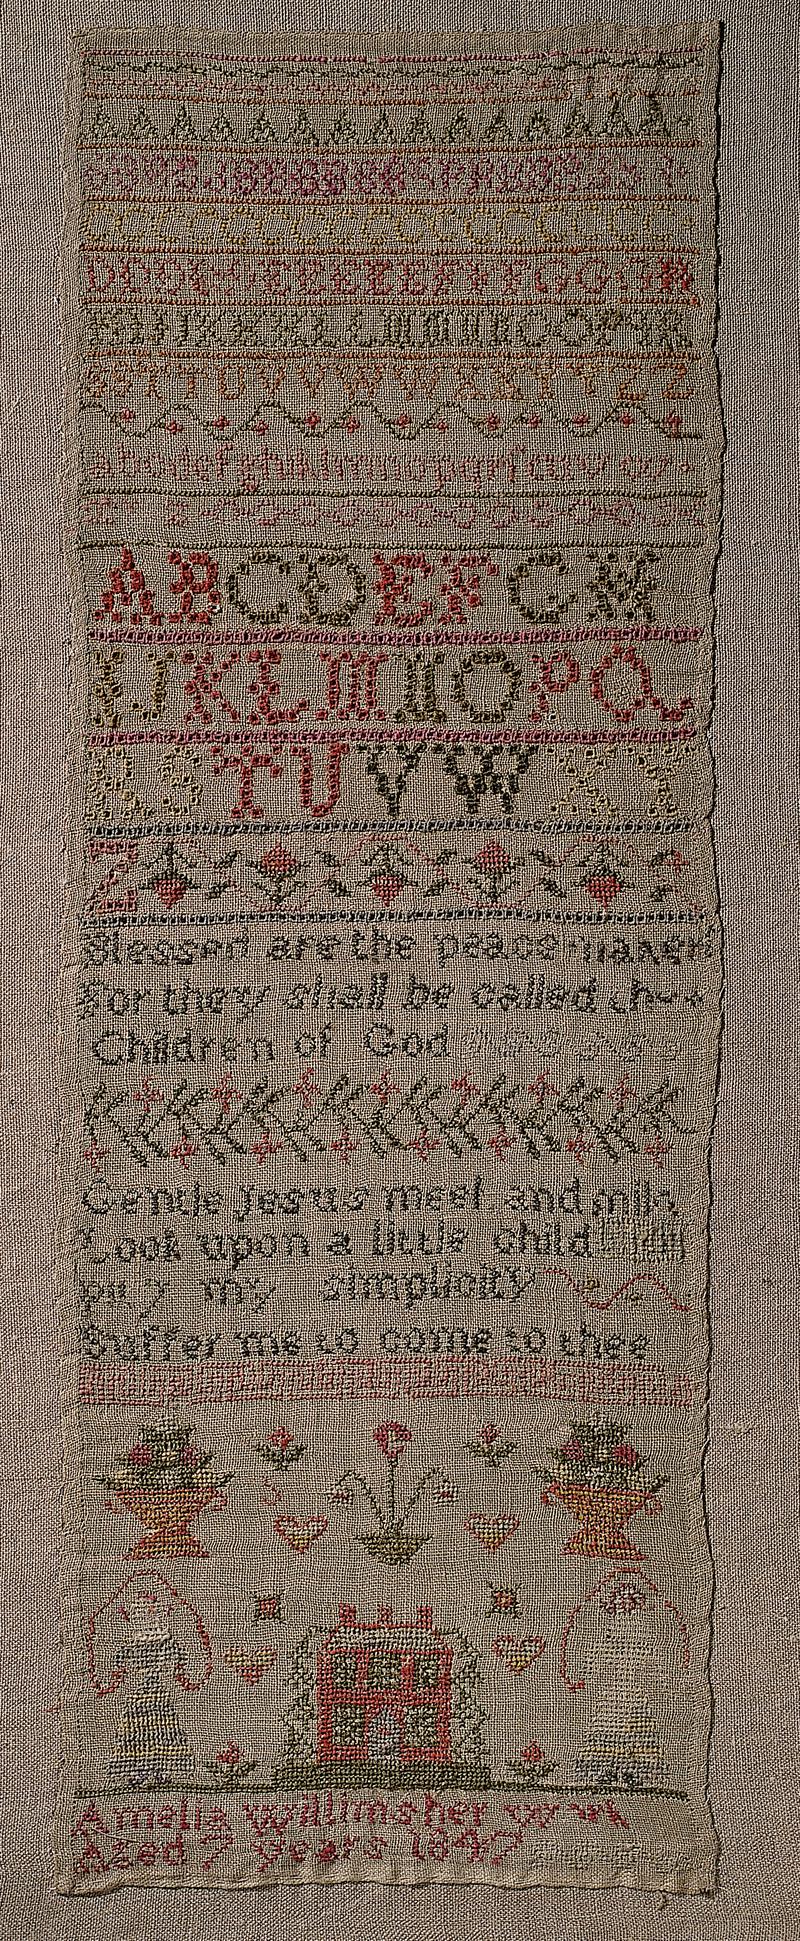 Embroidery Sampler made by Amelia Williams, Tongwynlais, 1847